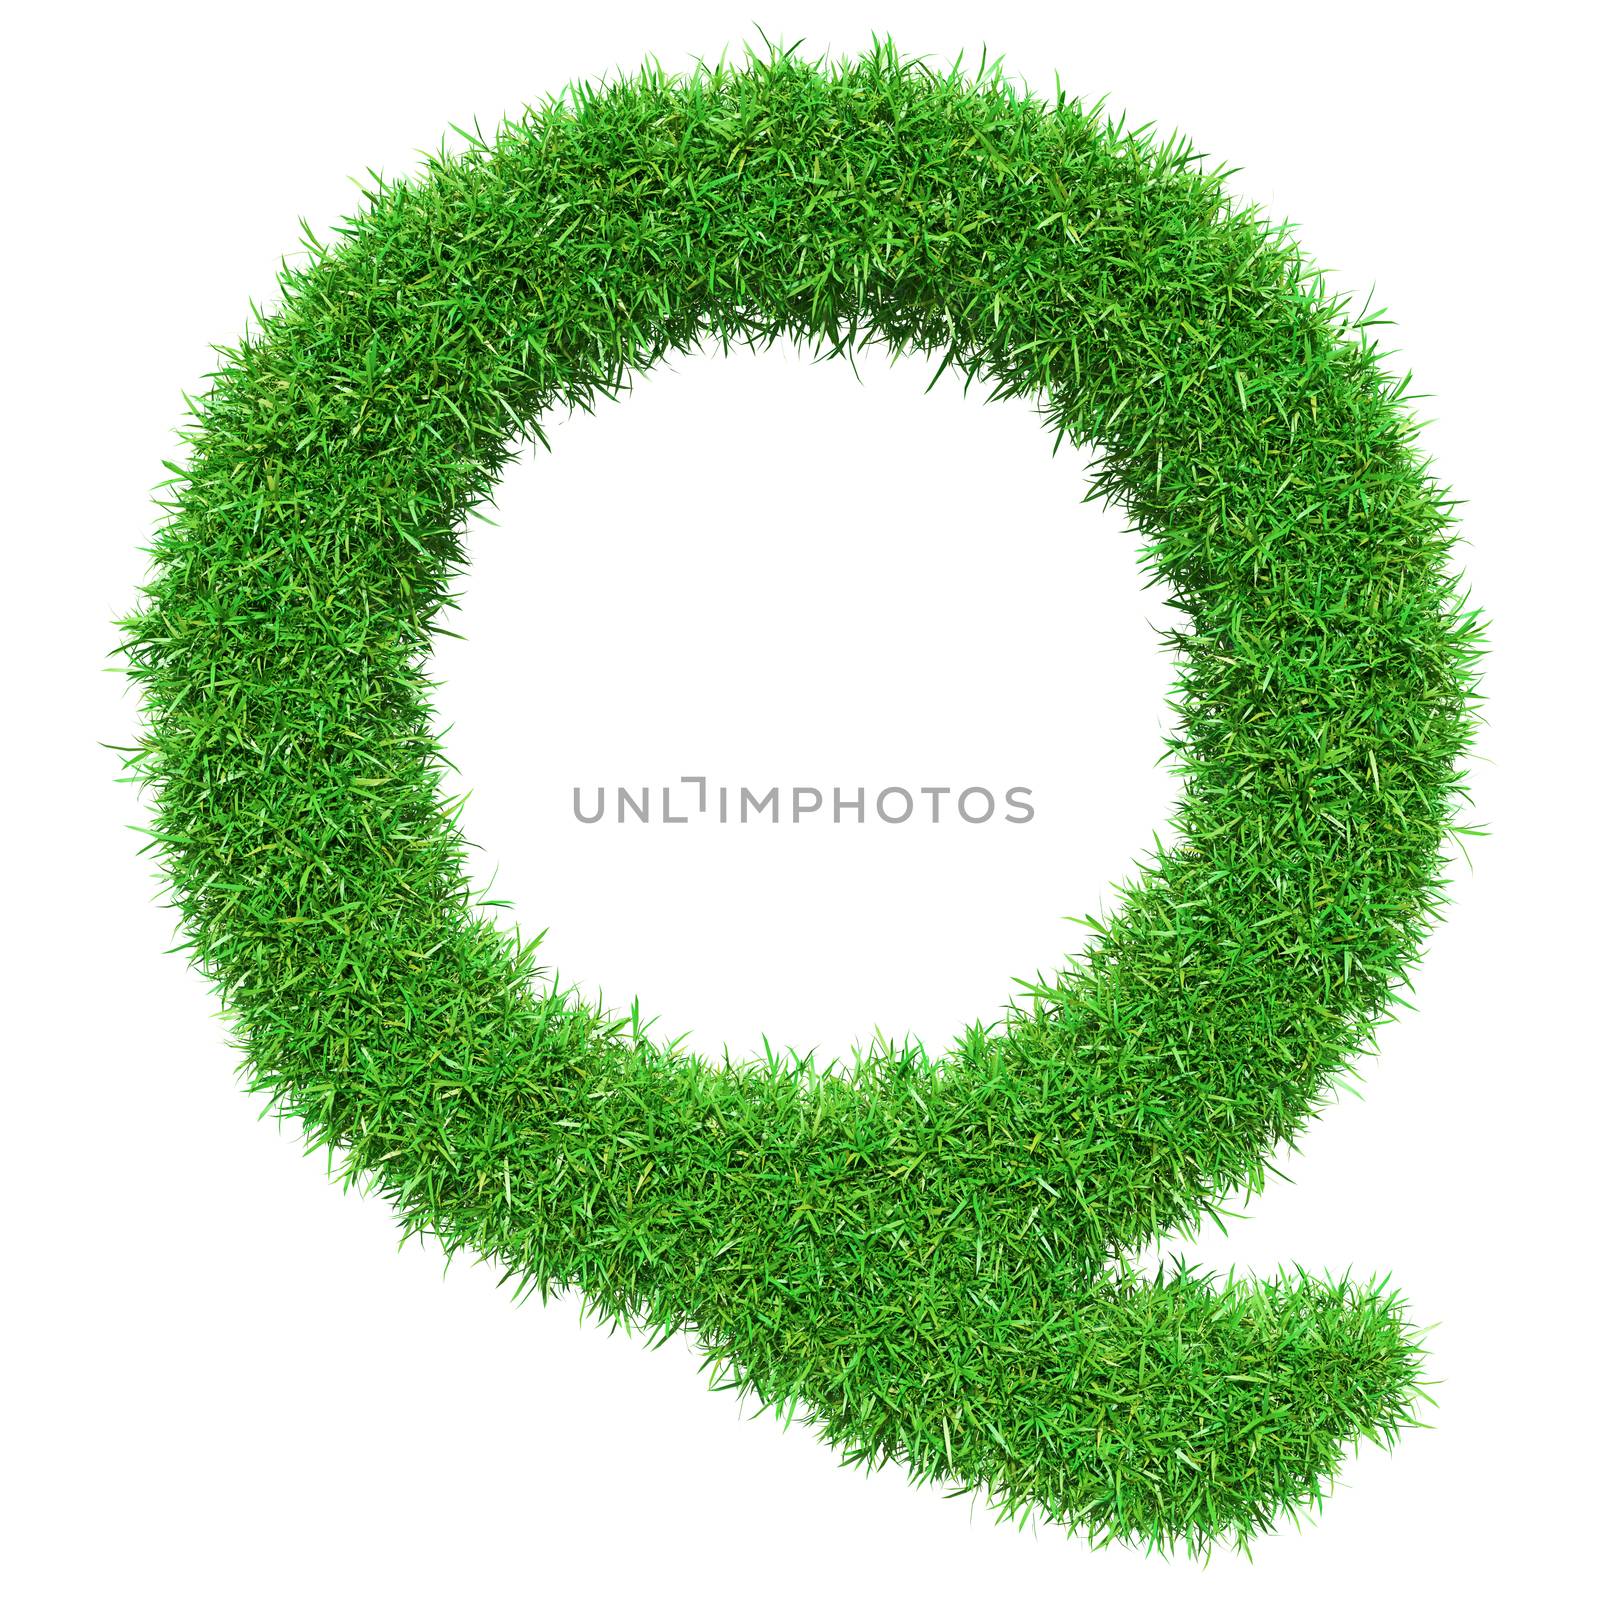 Green Grass Letter Q. Isolated On White Background. Font For Your Design. 3D Illustration